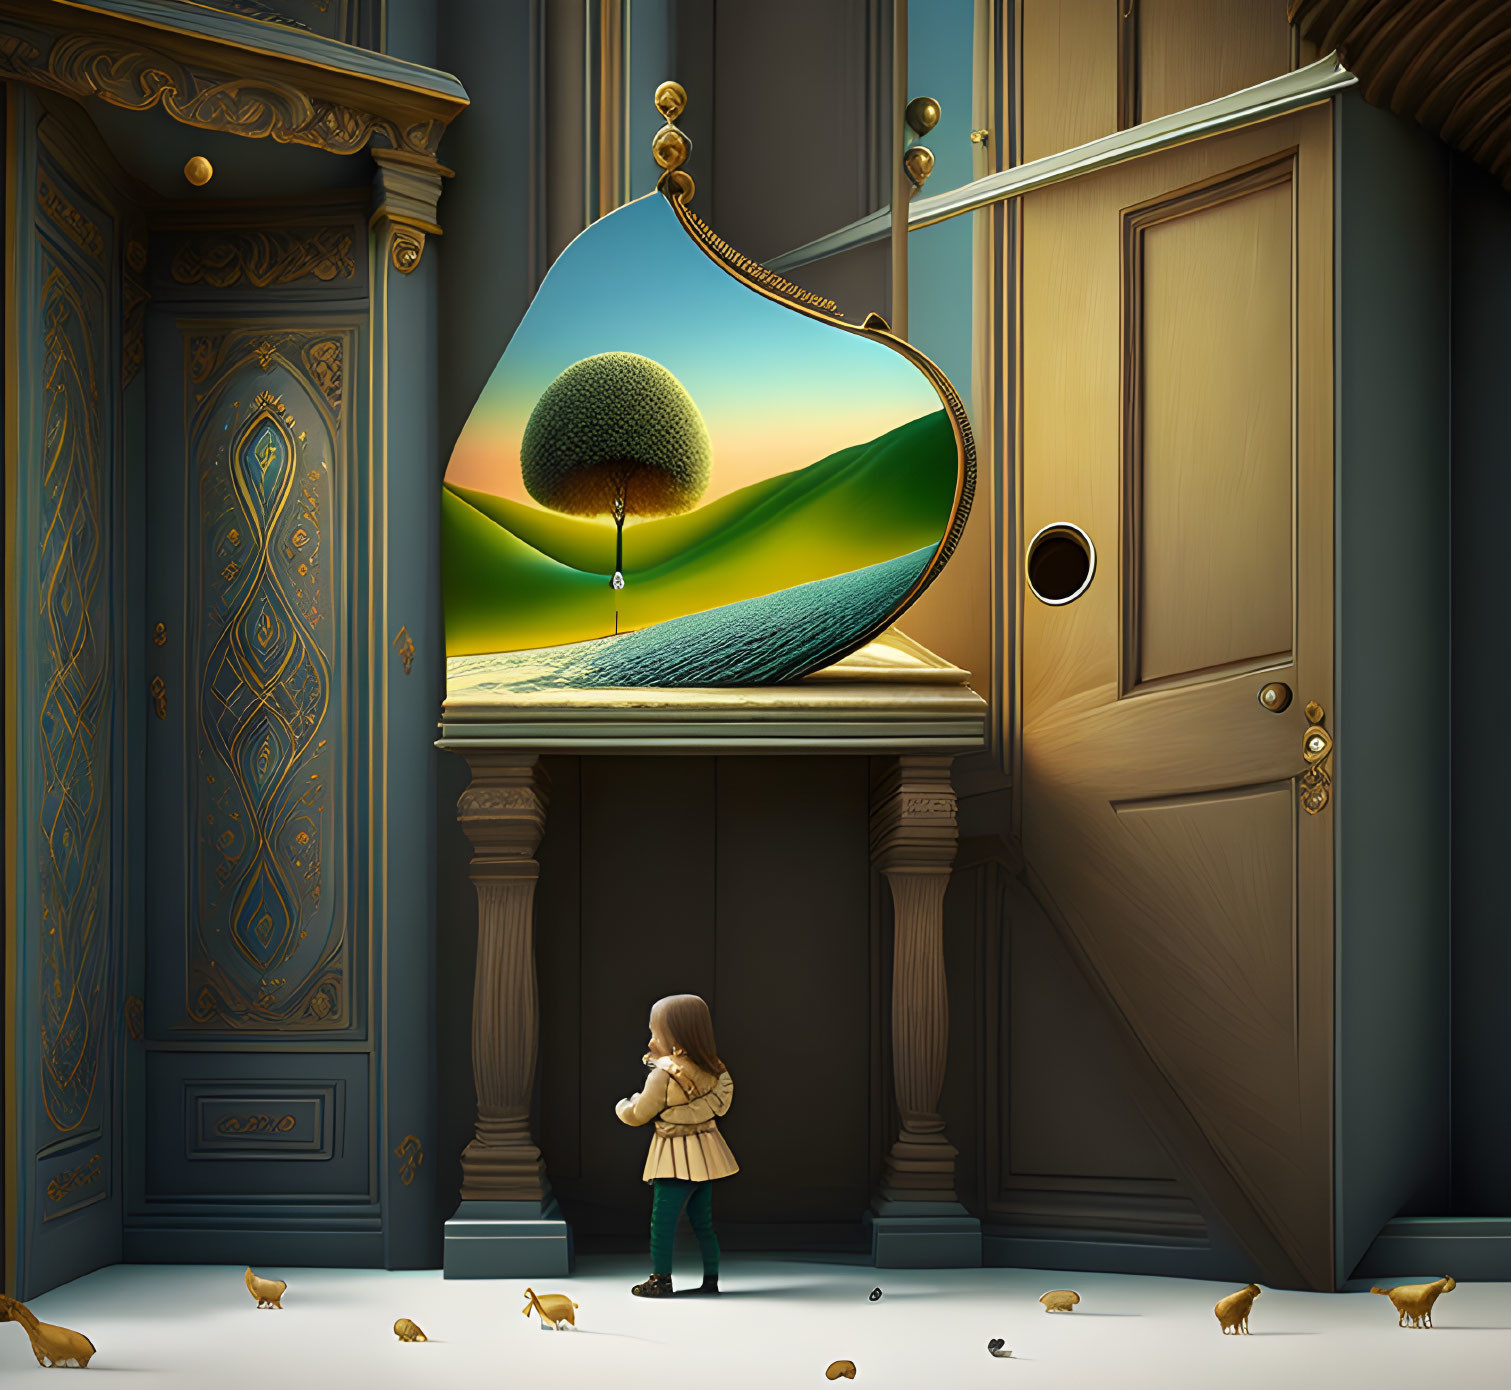 Surreal room with classical decor and teardrop-shaped portal, girl observes vibrant landscape with tree